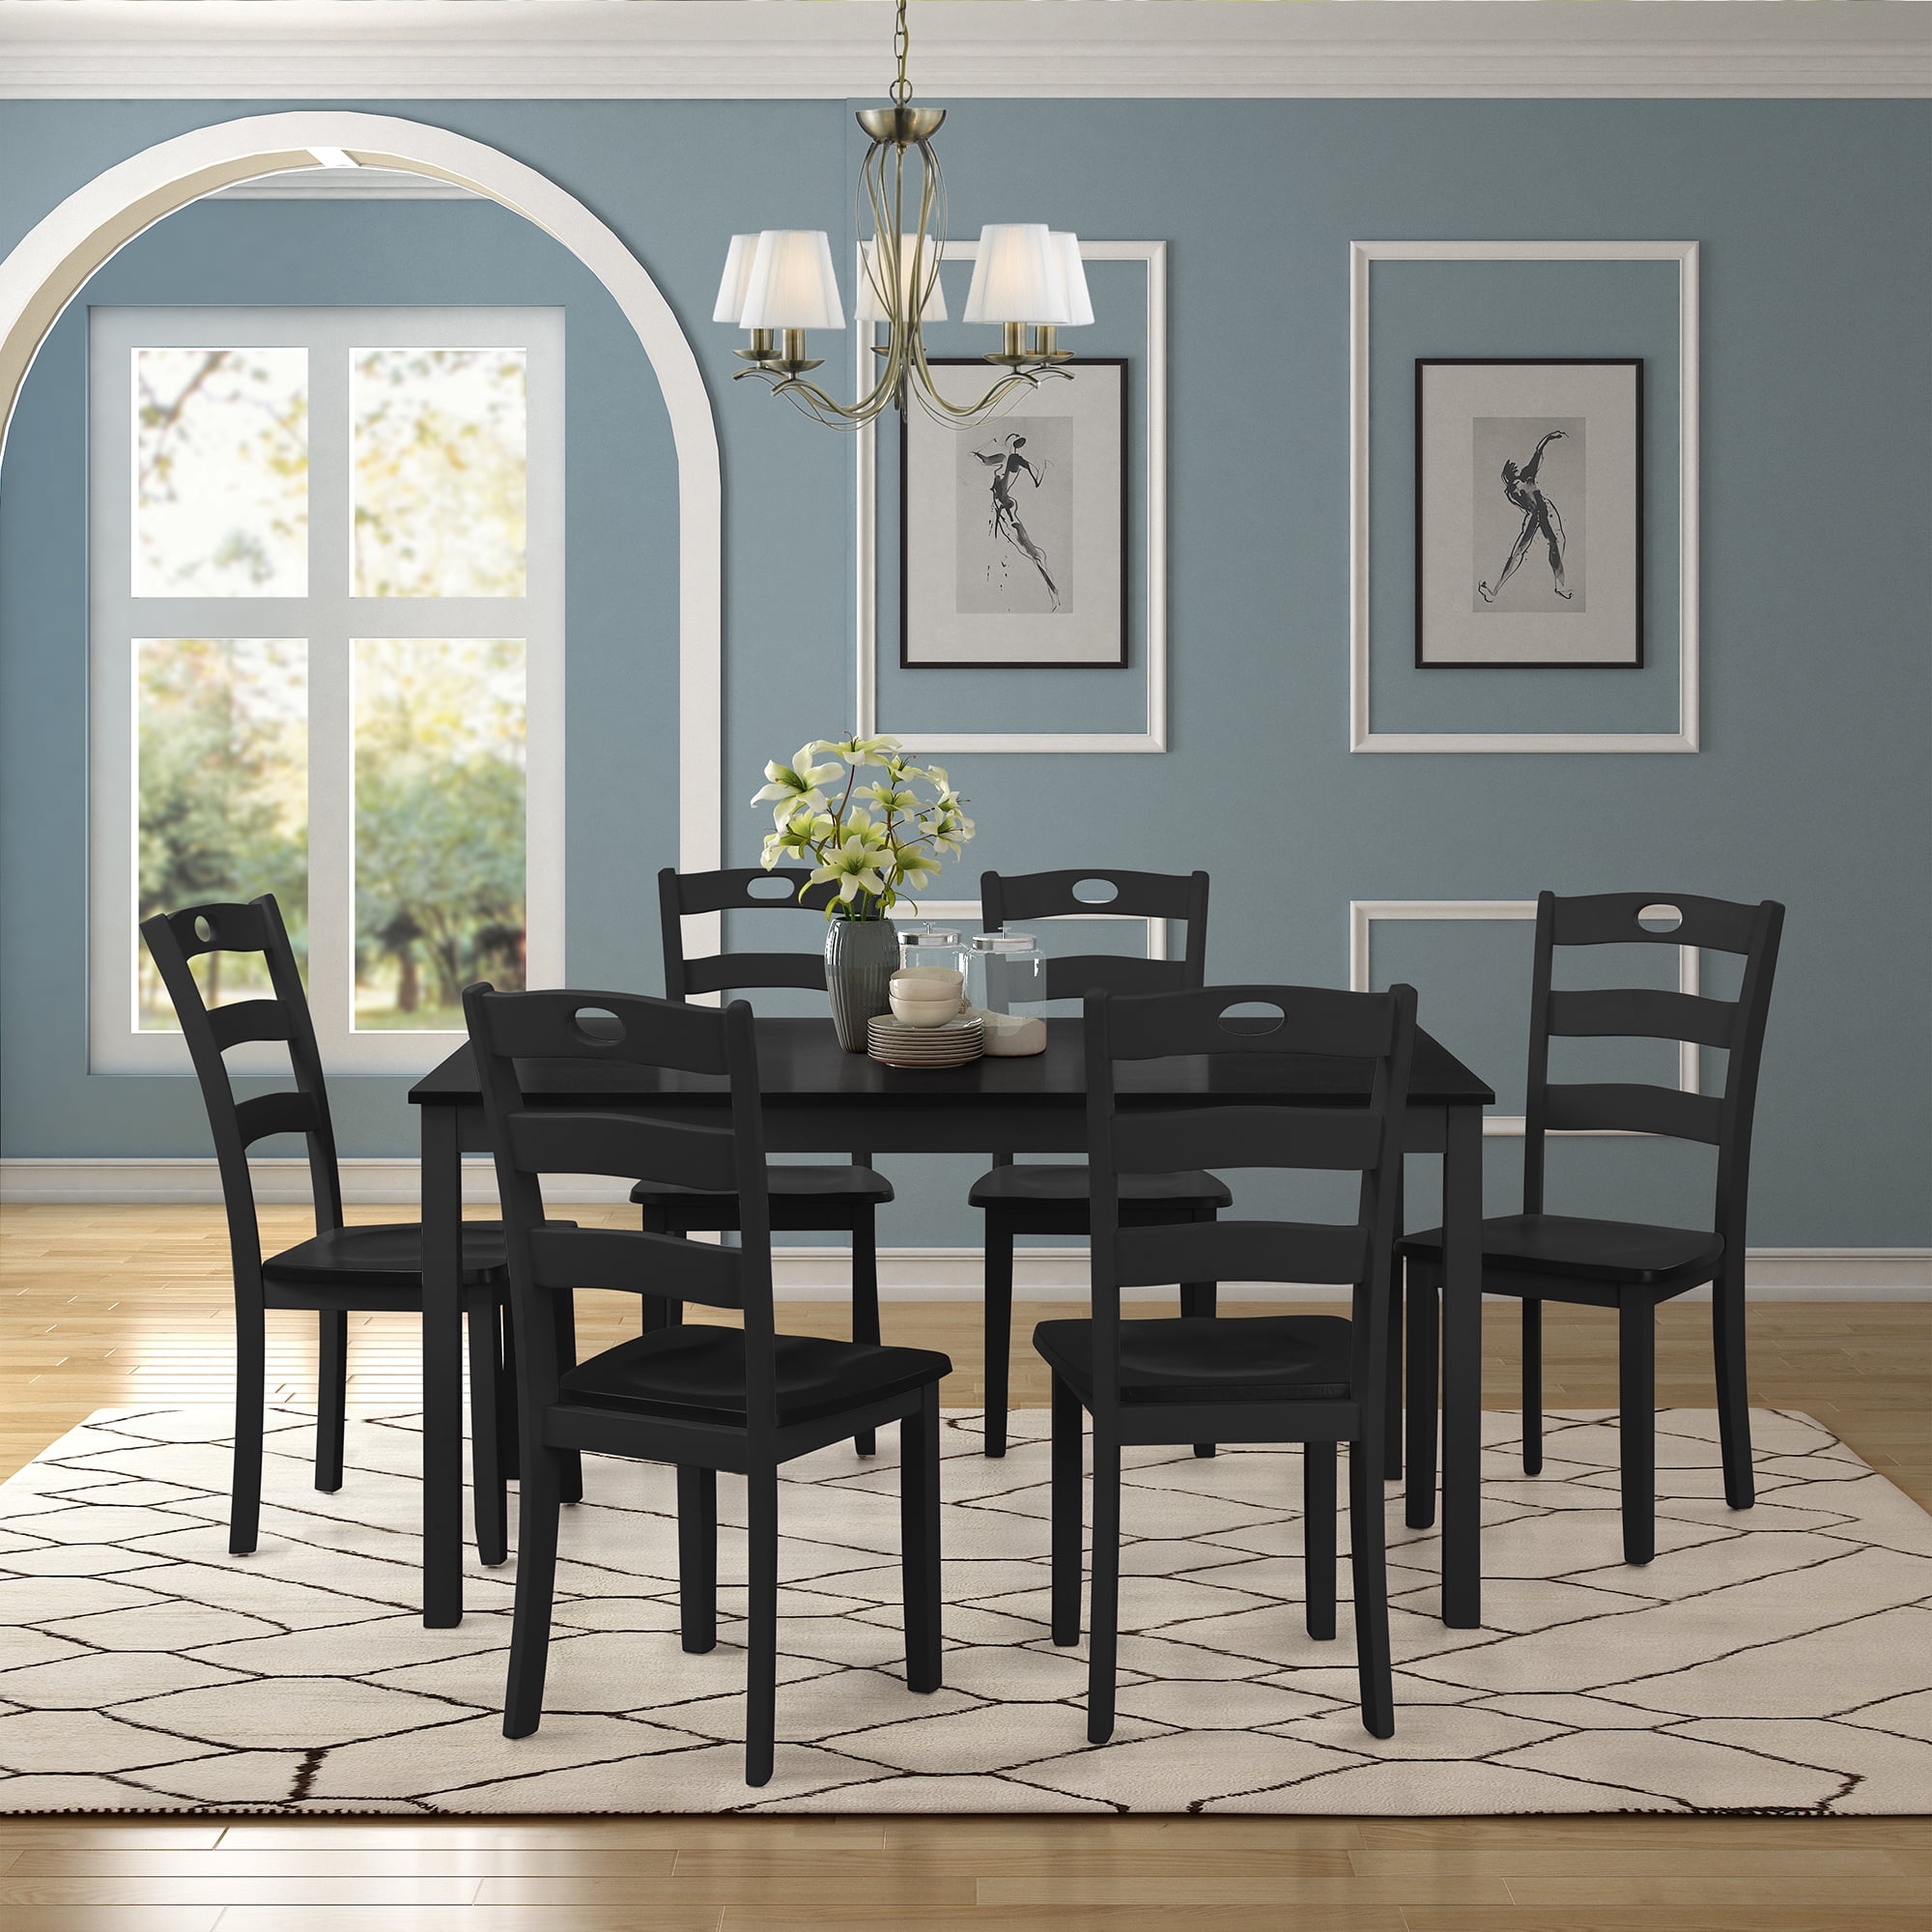 Clearance Dining Table Set With 6 Chairs